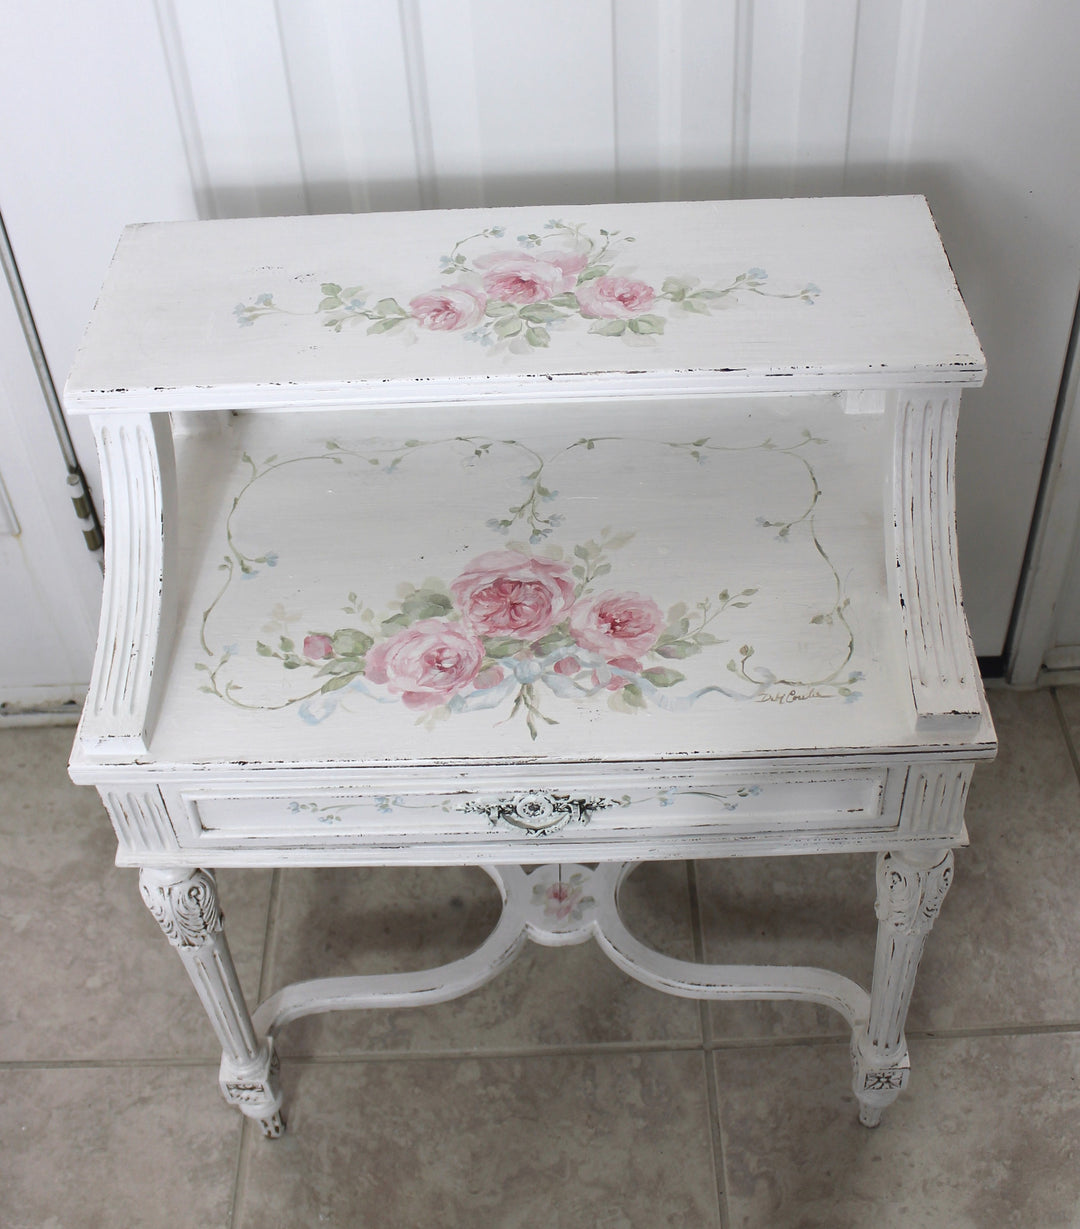 Vintage Romantic Cottage Shabby Chic Pink Roses Table by Debi Coules